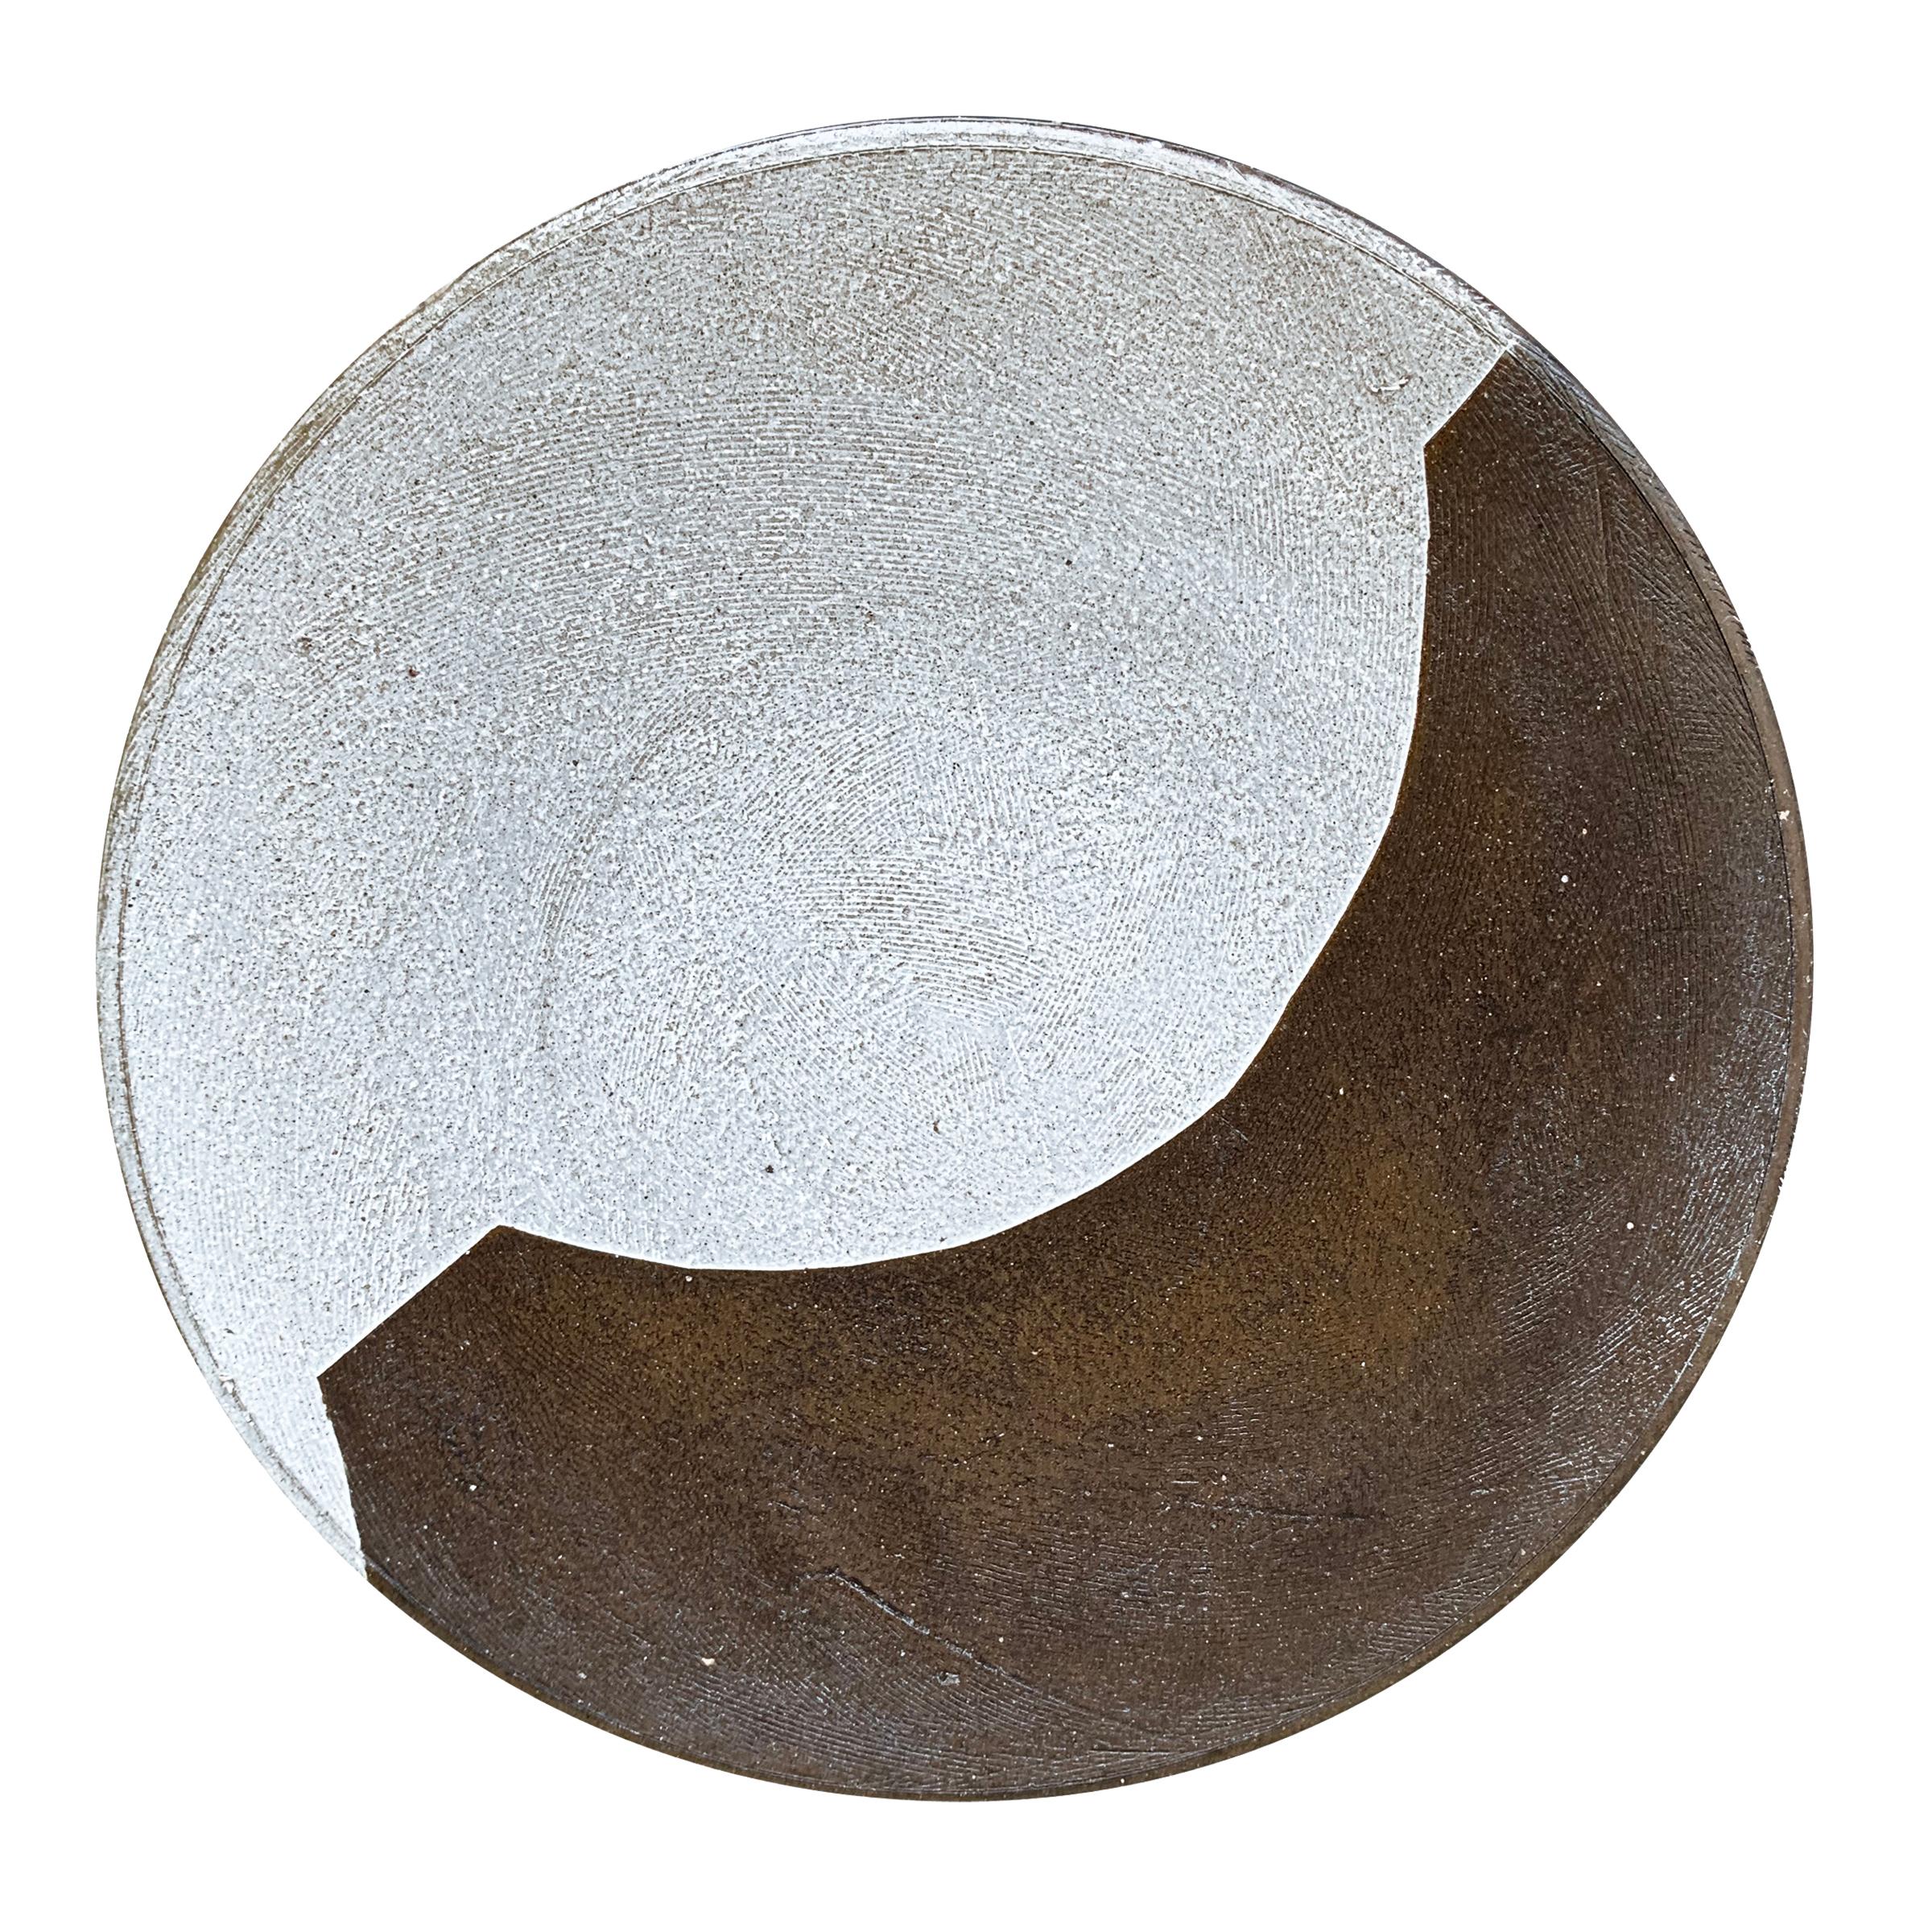 A fantastic set of eight hand-thrown dark brown stoneware dinner plates each with a unique bold white slip-glaze motif, and etched with a tool to add texture and a subtle sophisticated design.